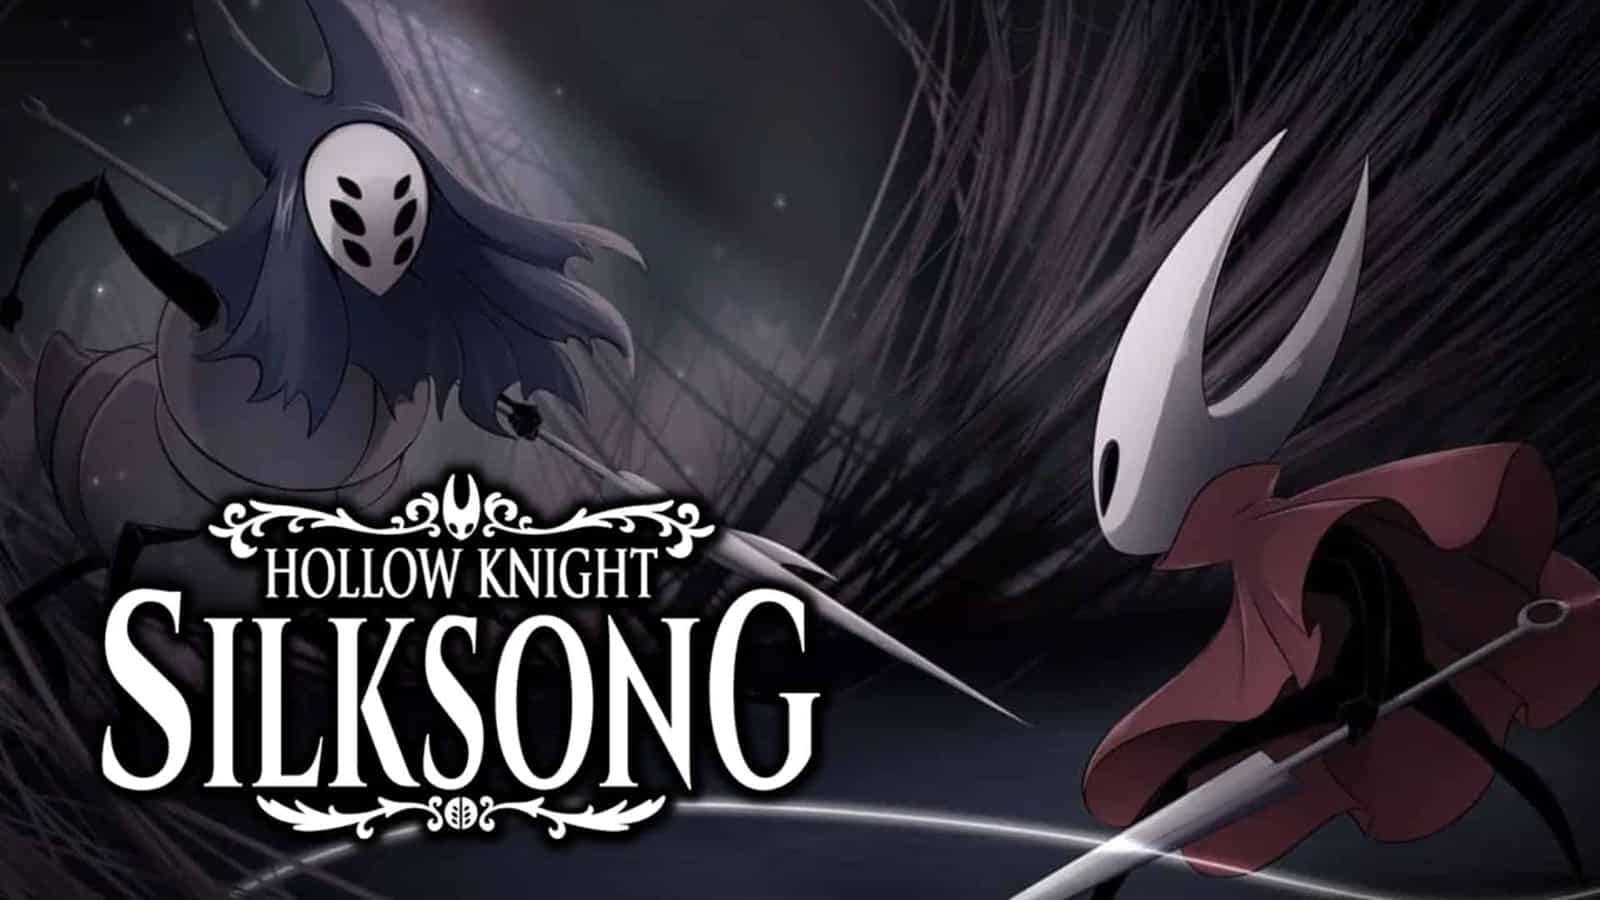 An image of Hornet and another character, with the Hollow Knight Silksong logo